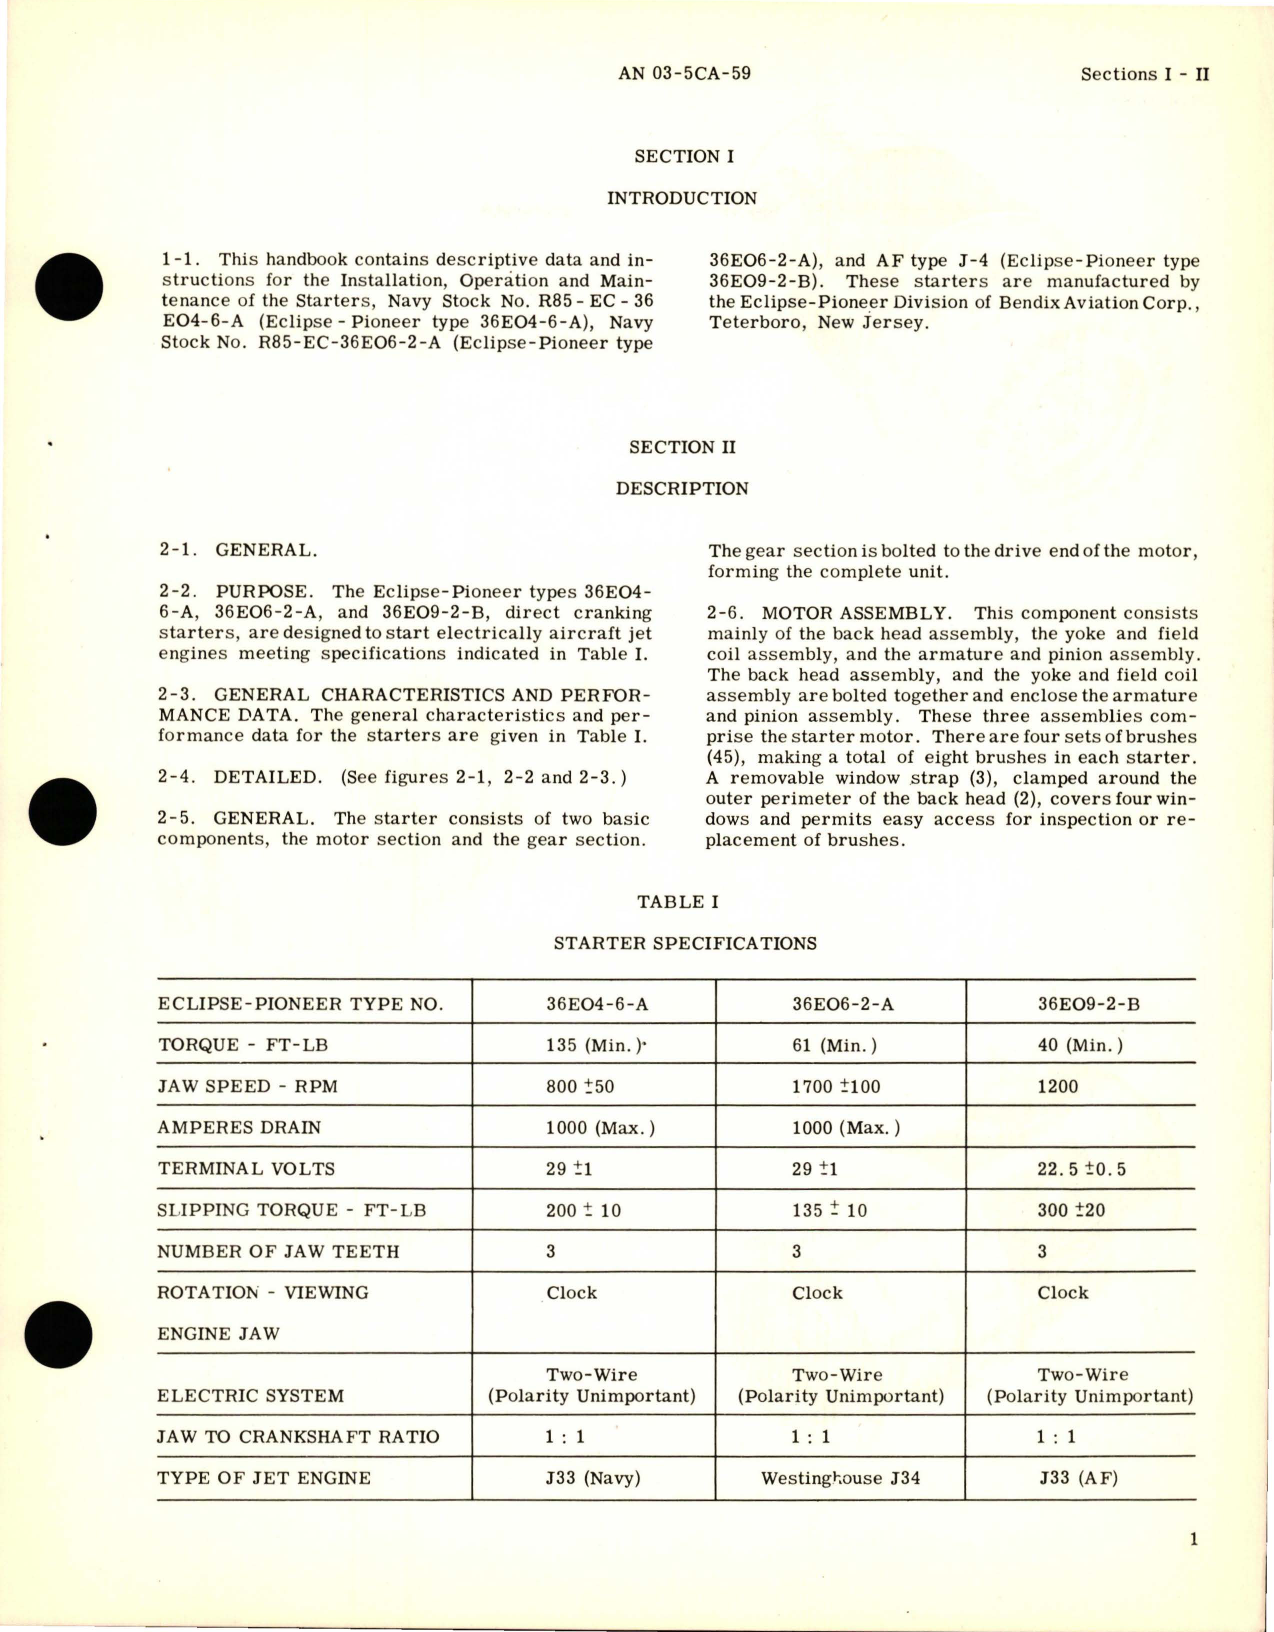 Sample page 5 from AirCorps Library document: Operation and Service Instructions for Starters - Models 36E04-6-A, 36E06-2-A, 36E09-2-B